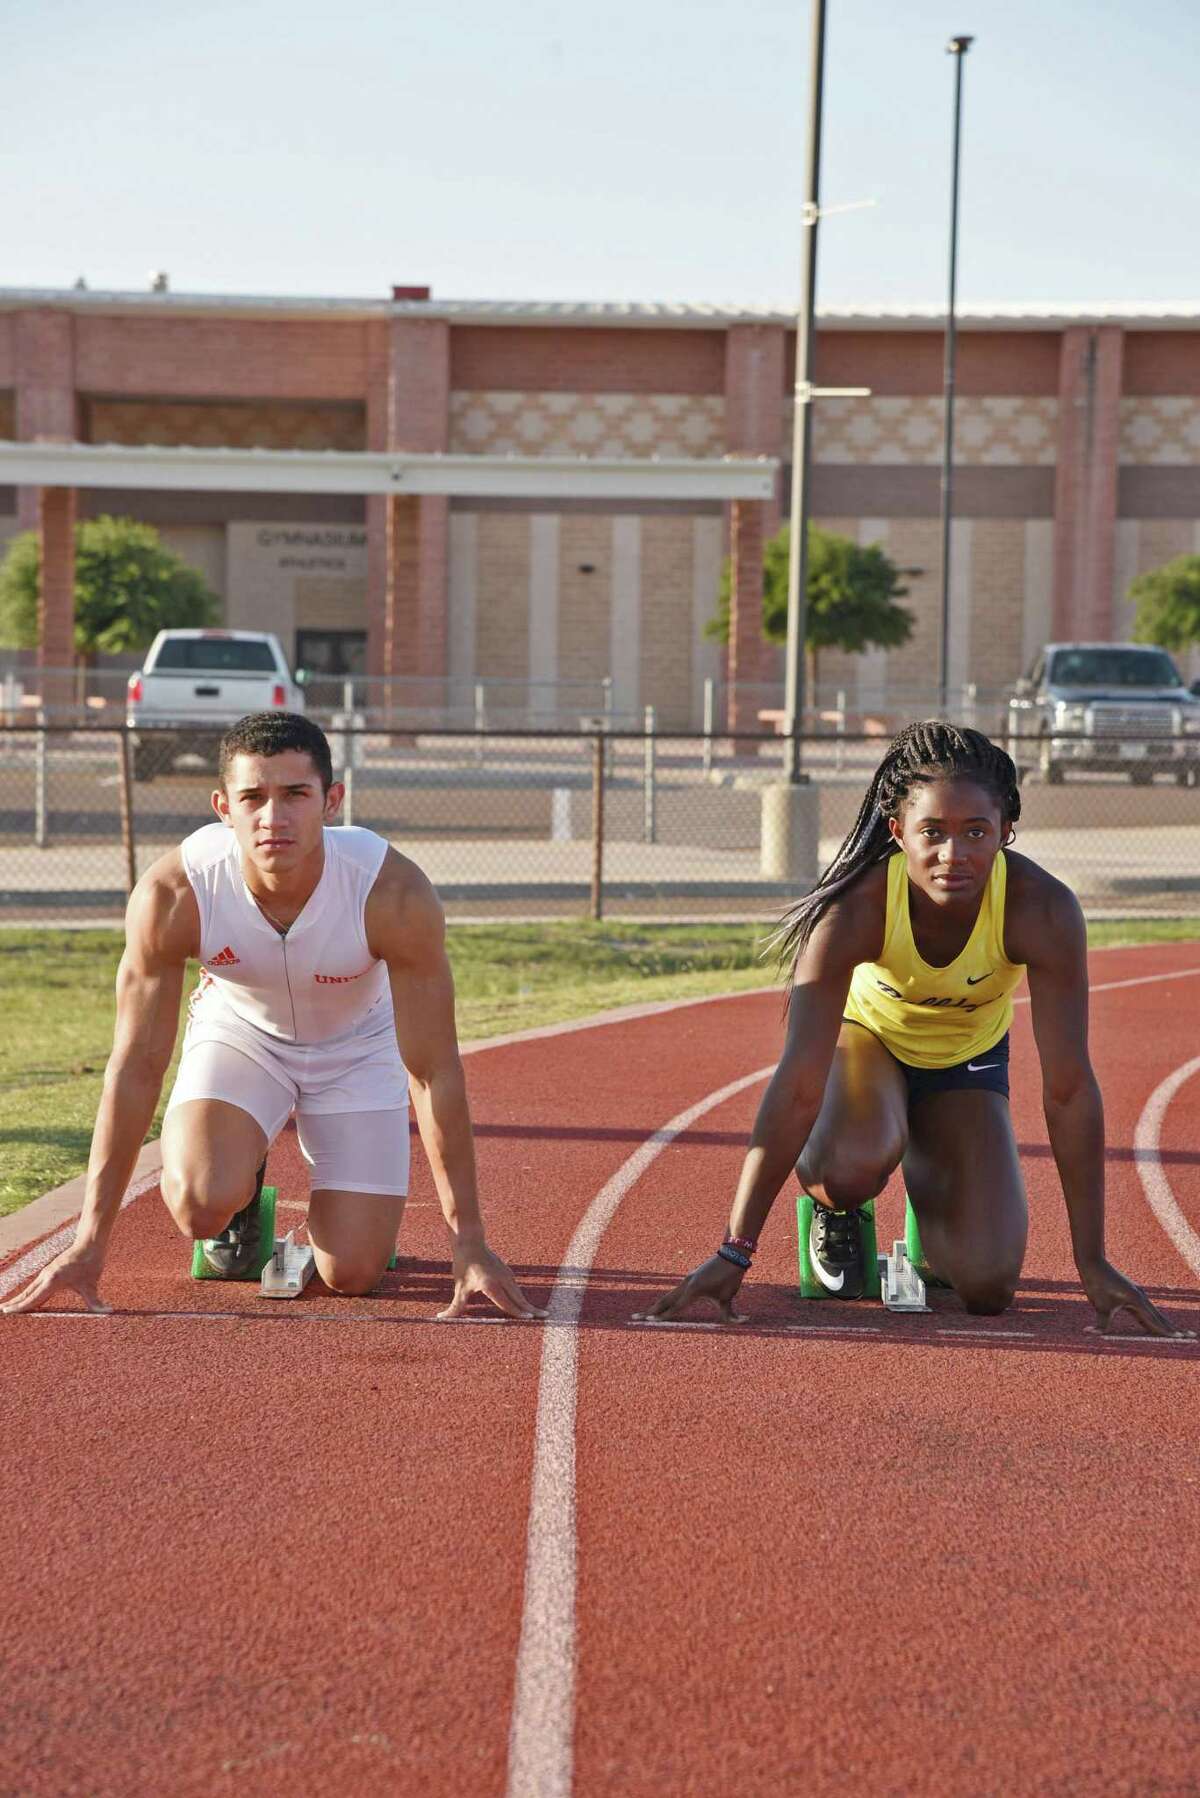 United's Alex Tirado and Alexander's Cynthia Emeremnu will compete in the 100-meter dash this weekend at the 2018 Track & Field State Meet in Austin. Tirado will also be a part of the Longhorns’ 4x100-meter relay. They posed for photos at the United High School track, Wednesday, May 9, 2018.